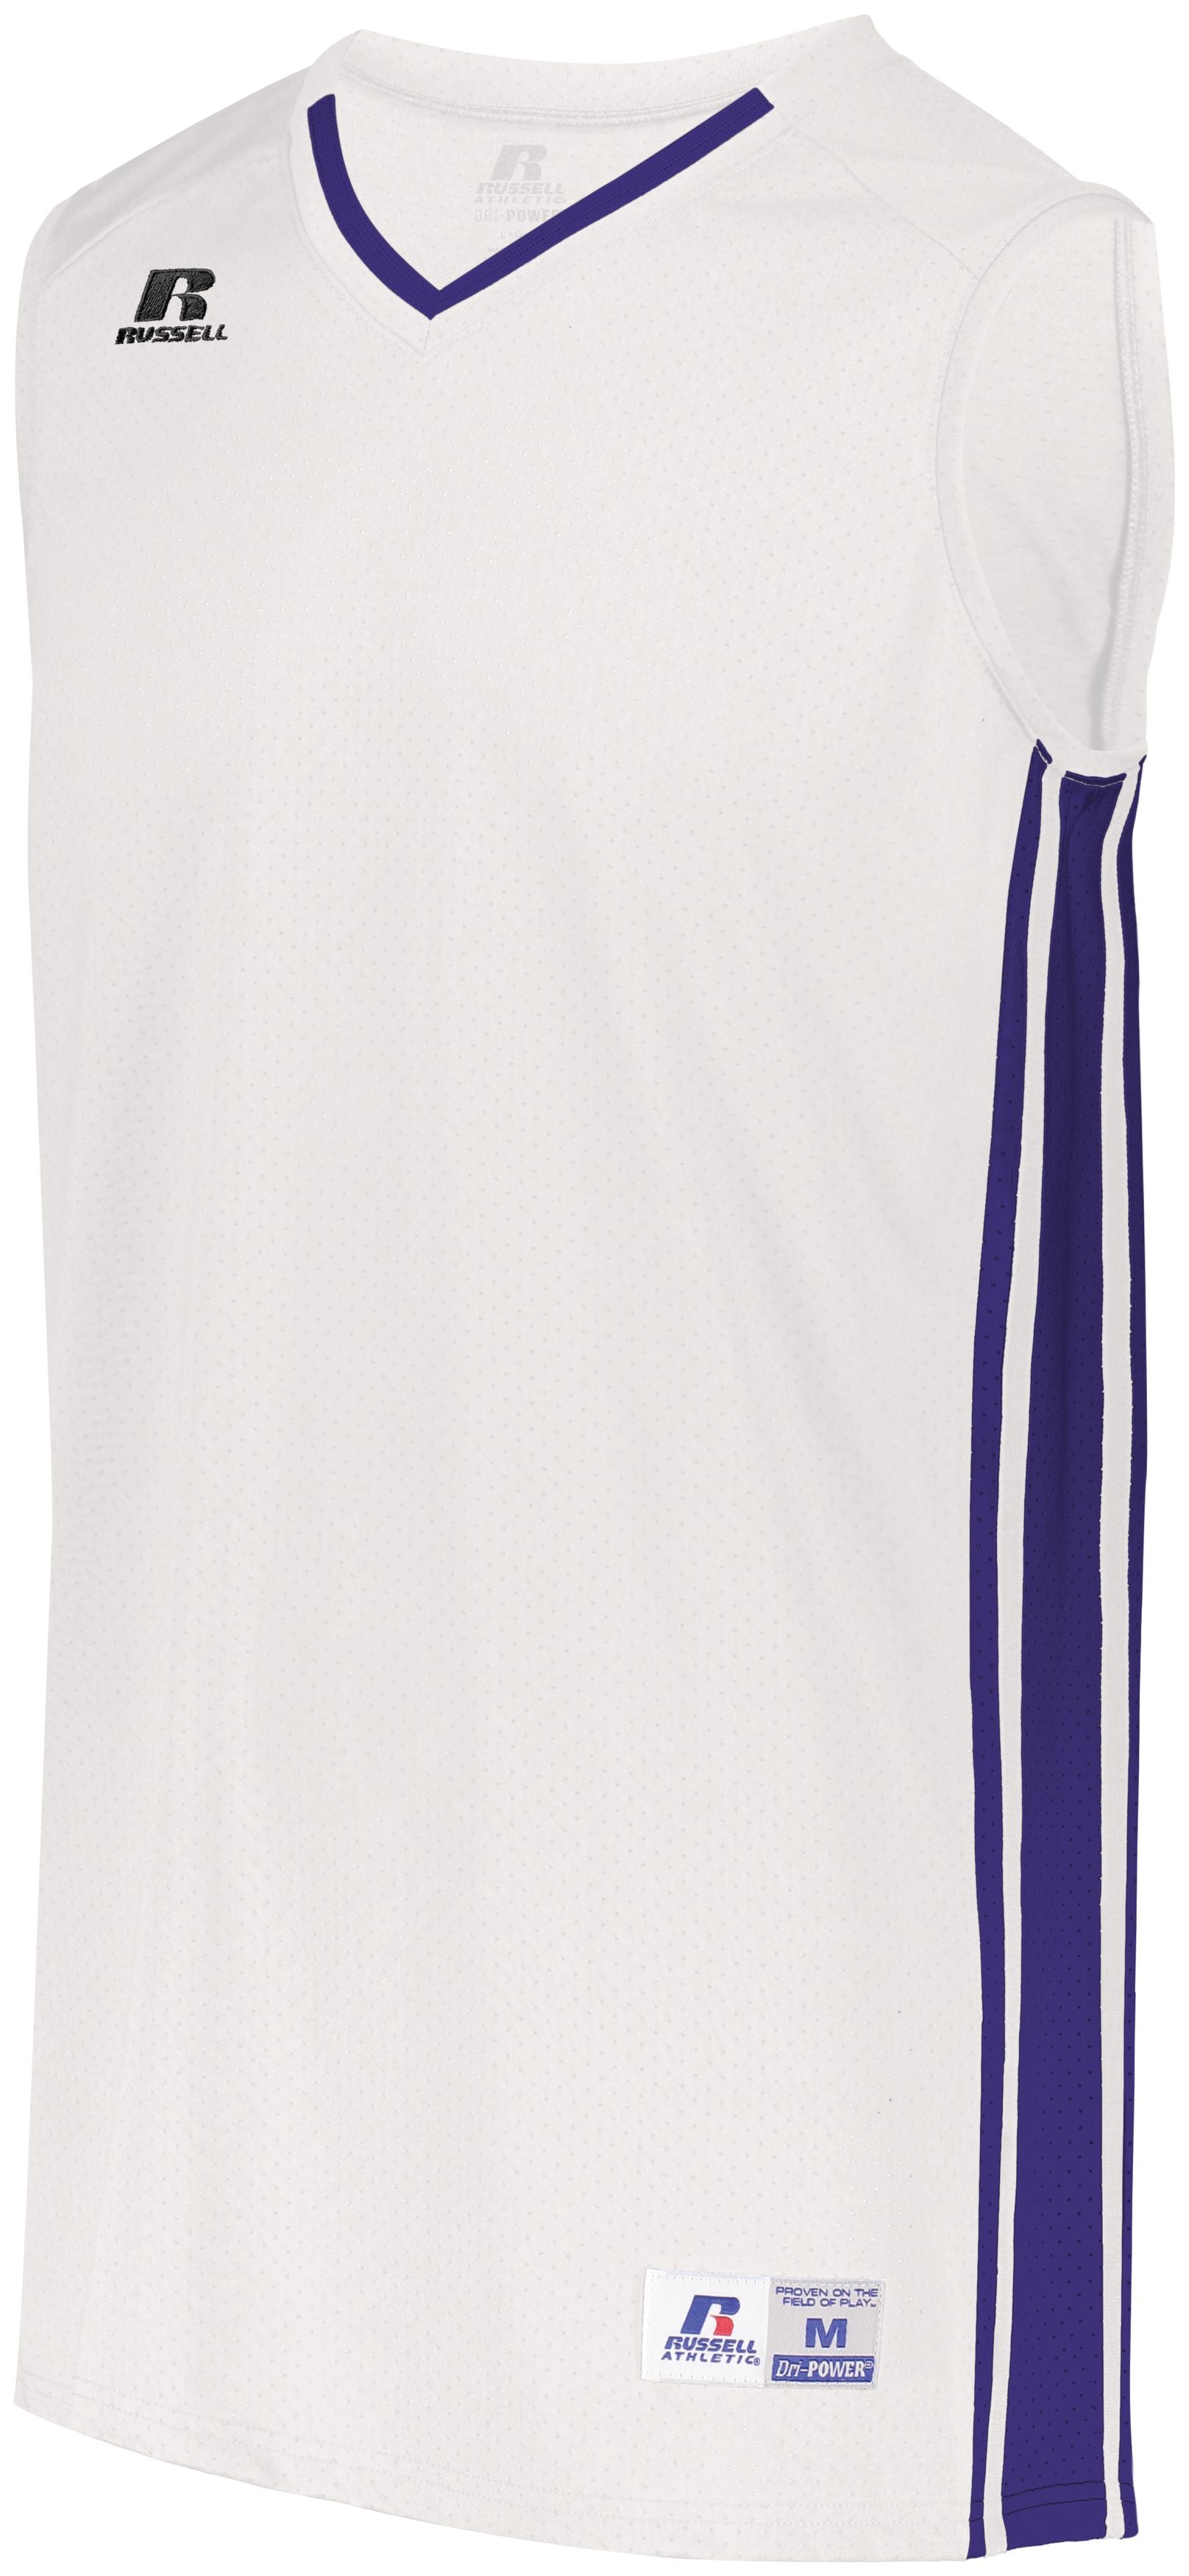 Russell Athletic Legacy Basketball Jersey in White/Purple  -Part of the Adult, Adult-Jersey, Basketball, Russell-Athletic-Products, Shirts, All-Sports, All-Sports-1 product lines at KanaleyCreations.com